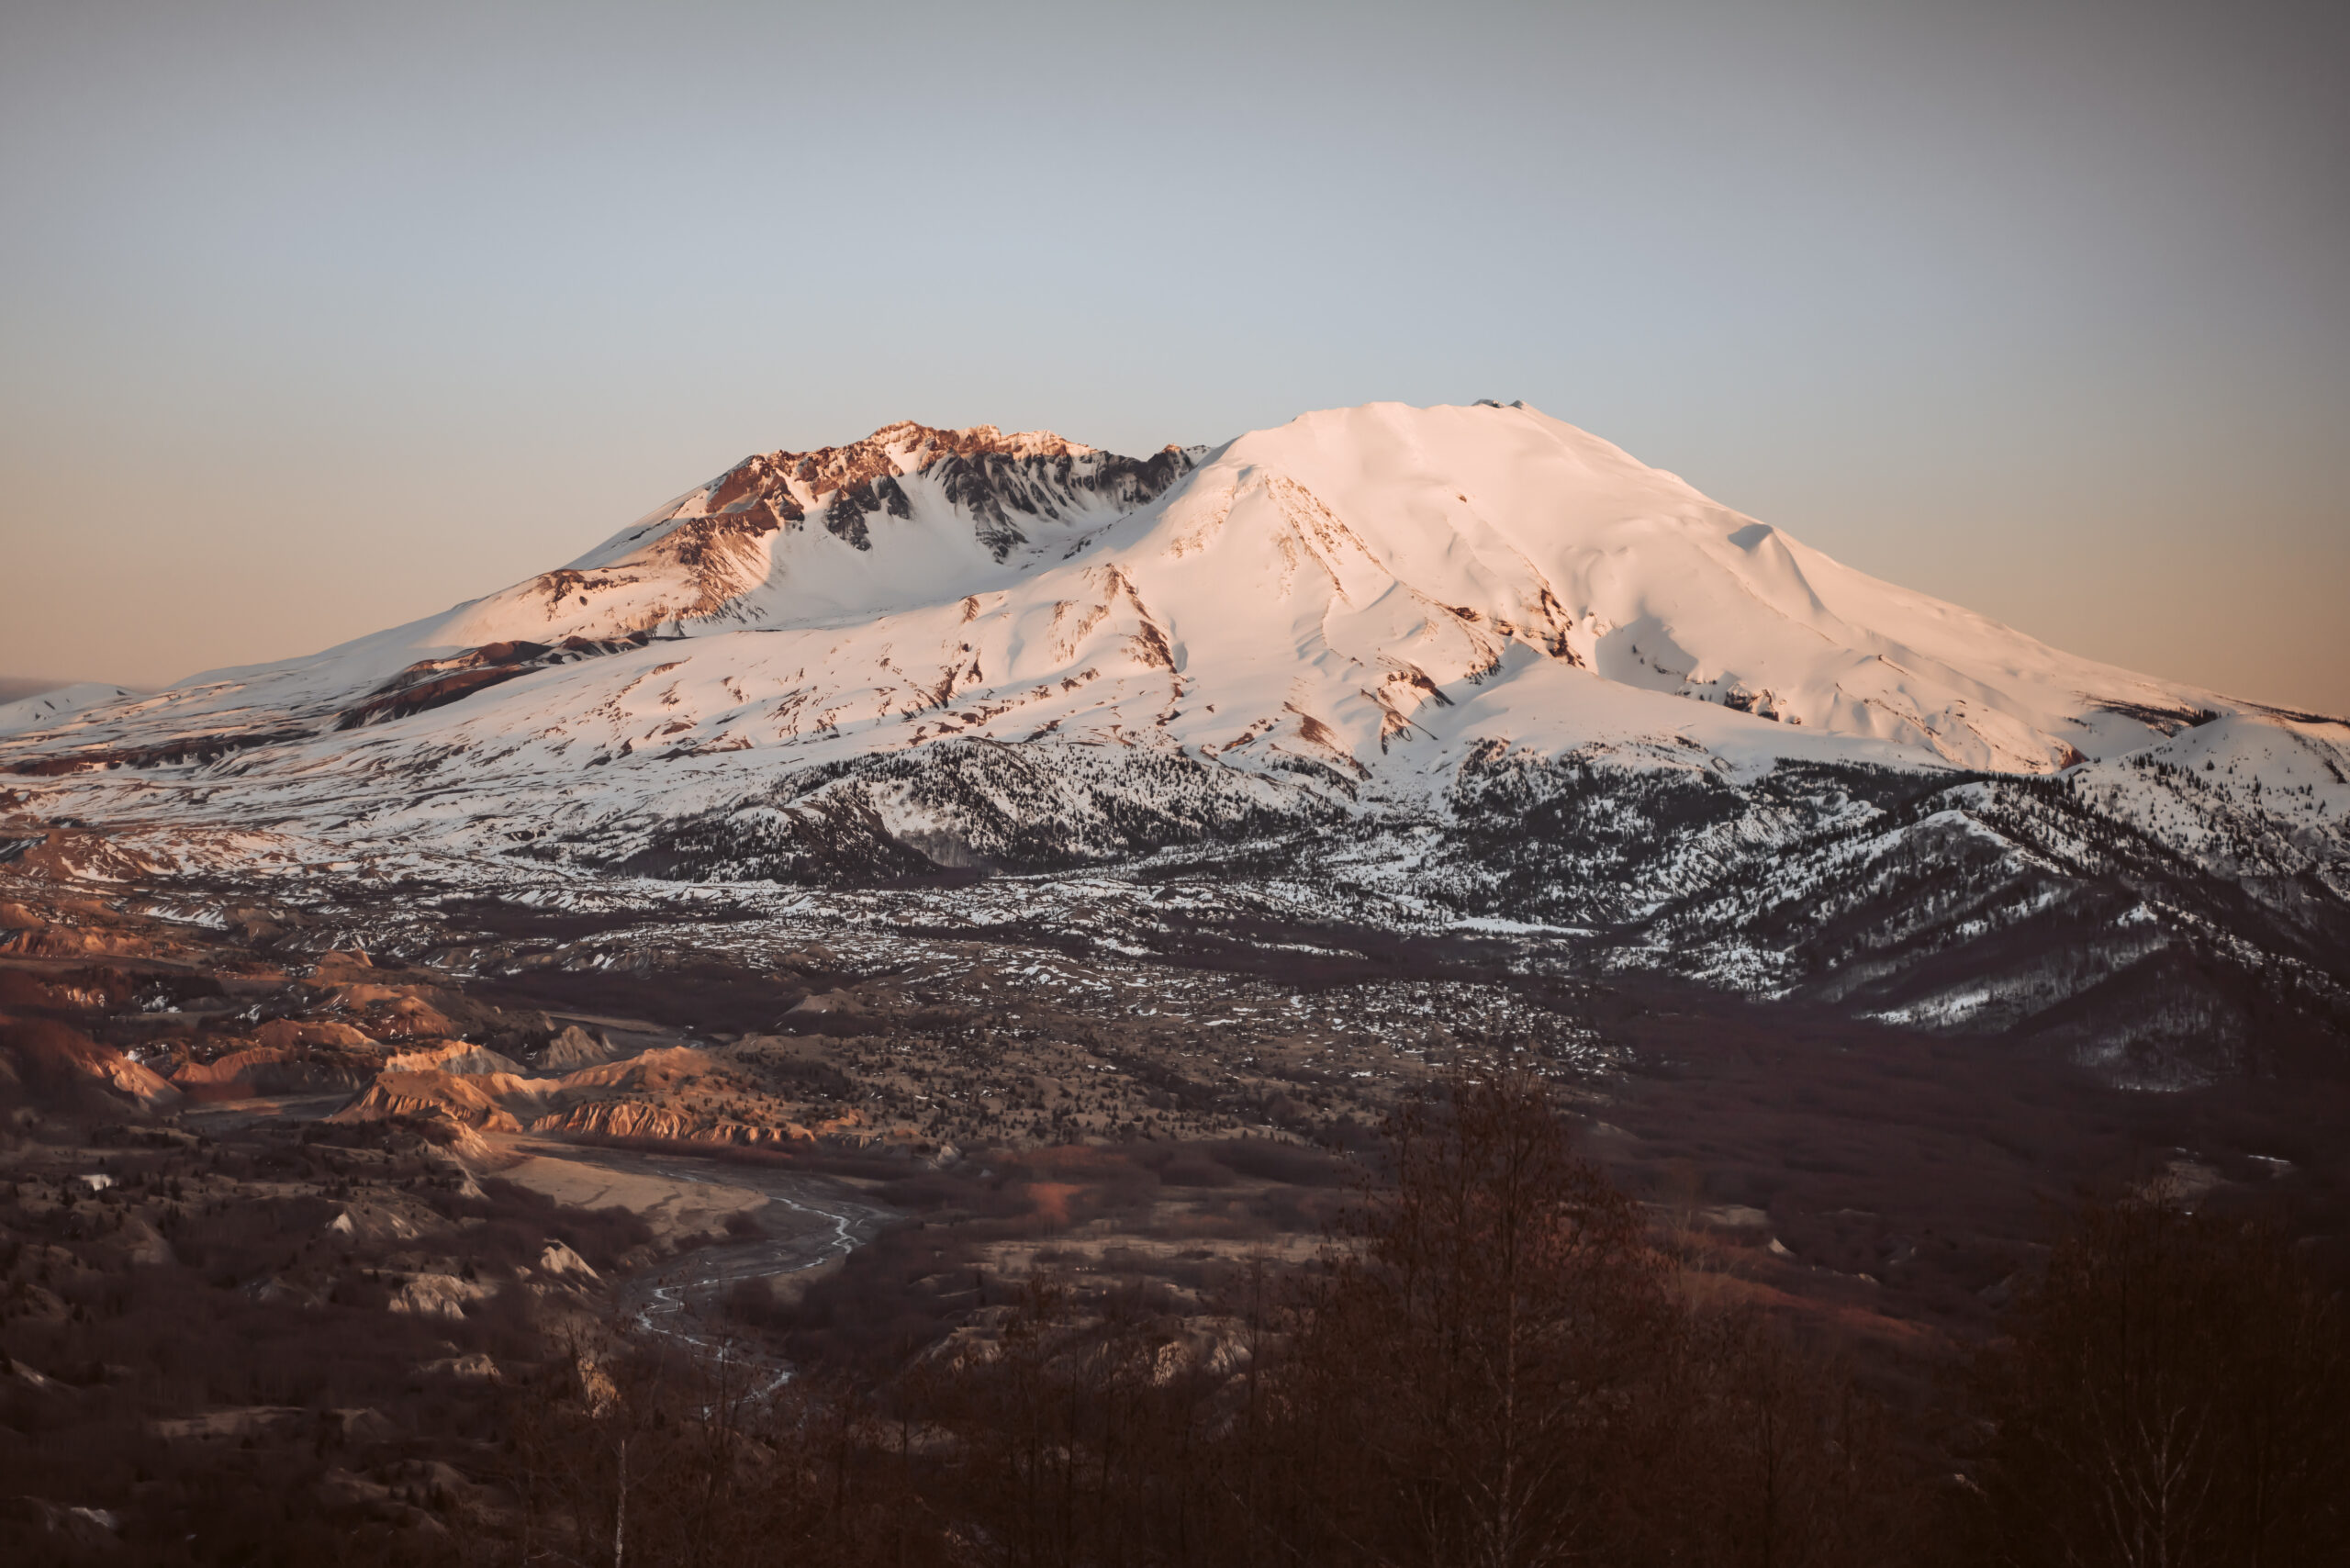 Mount Saint Helens covered in snow